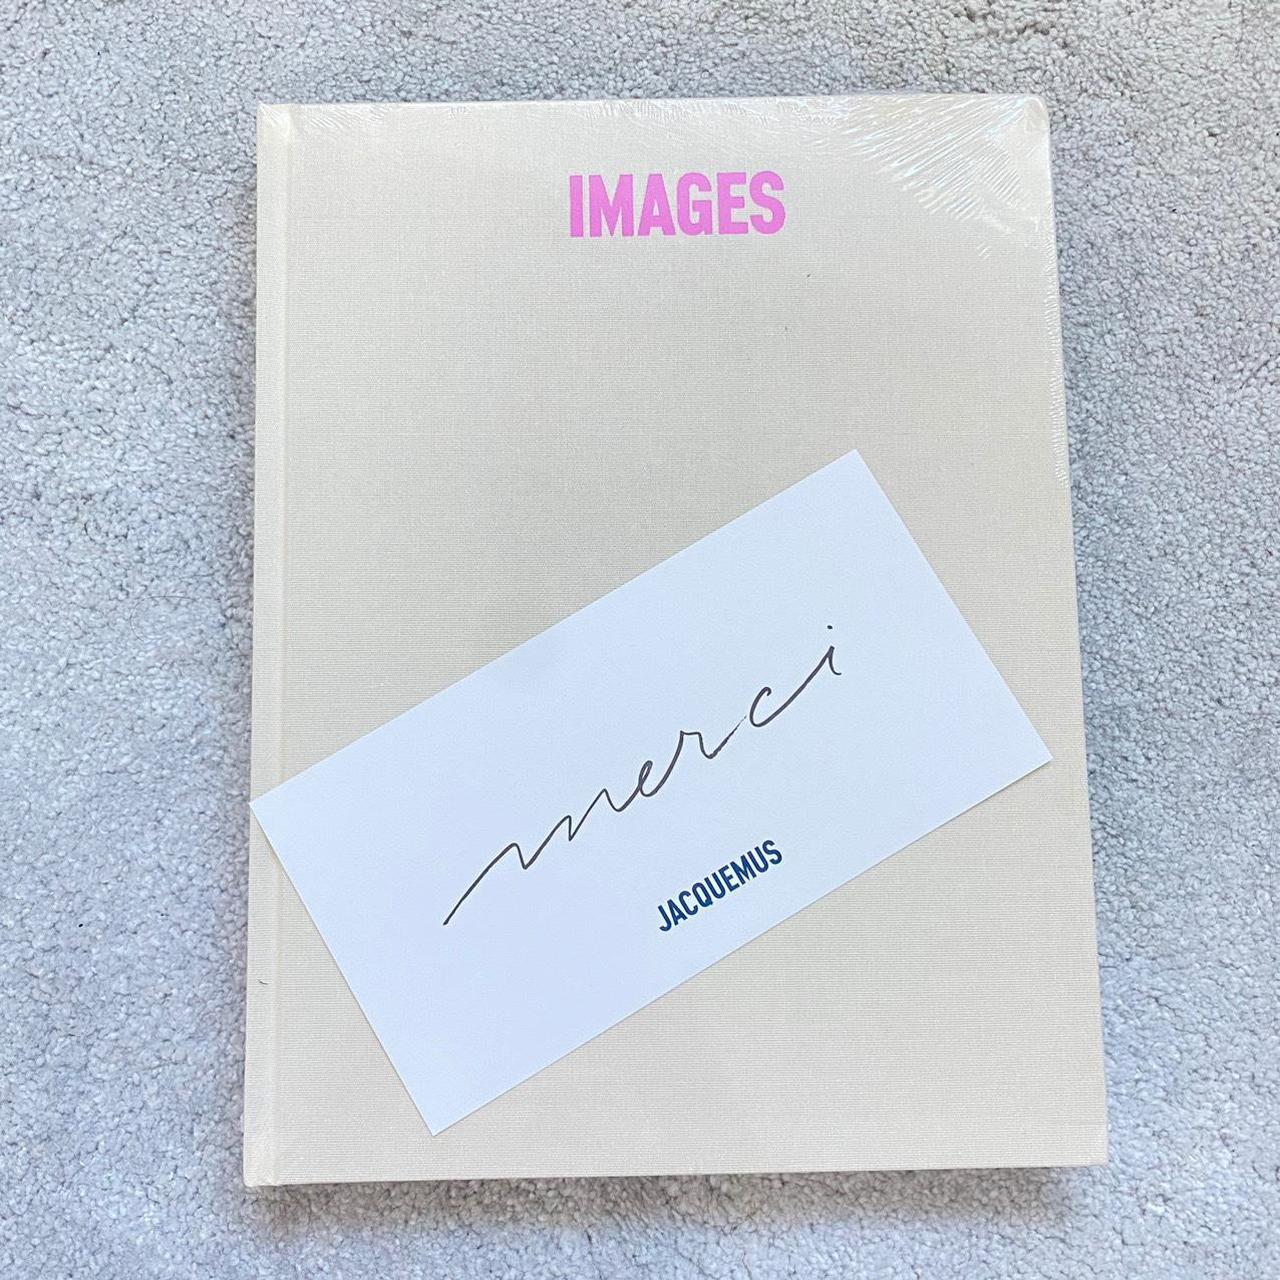 Product Image 2 - Jacquemus Images 2 book. Beautiful